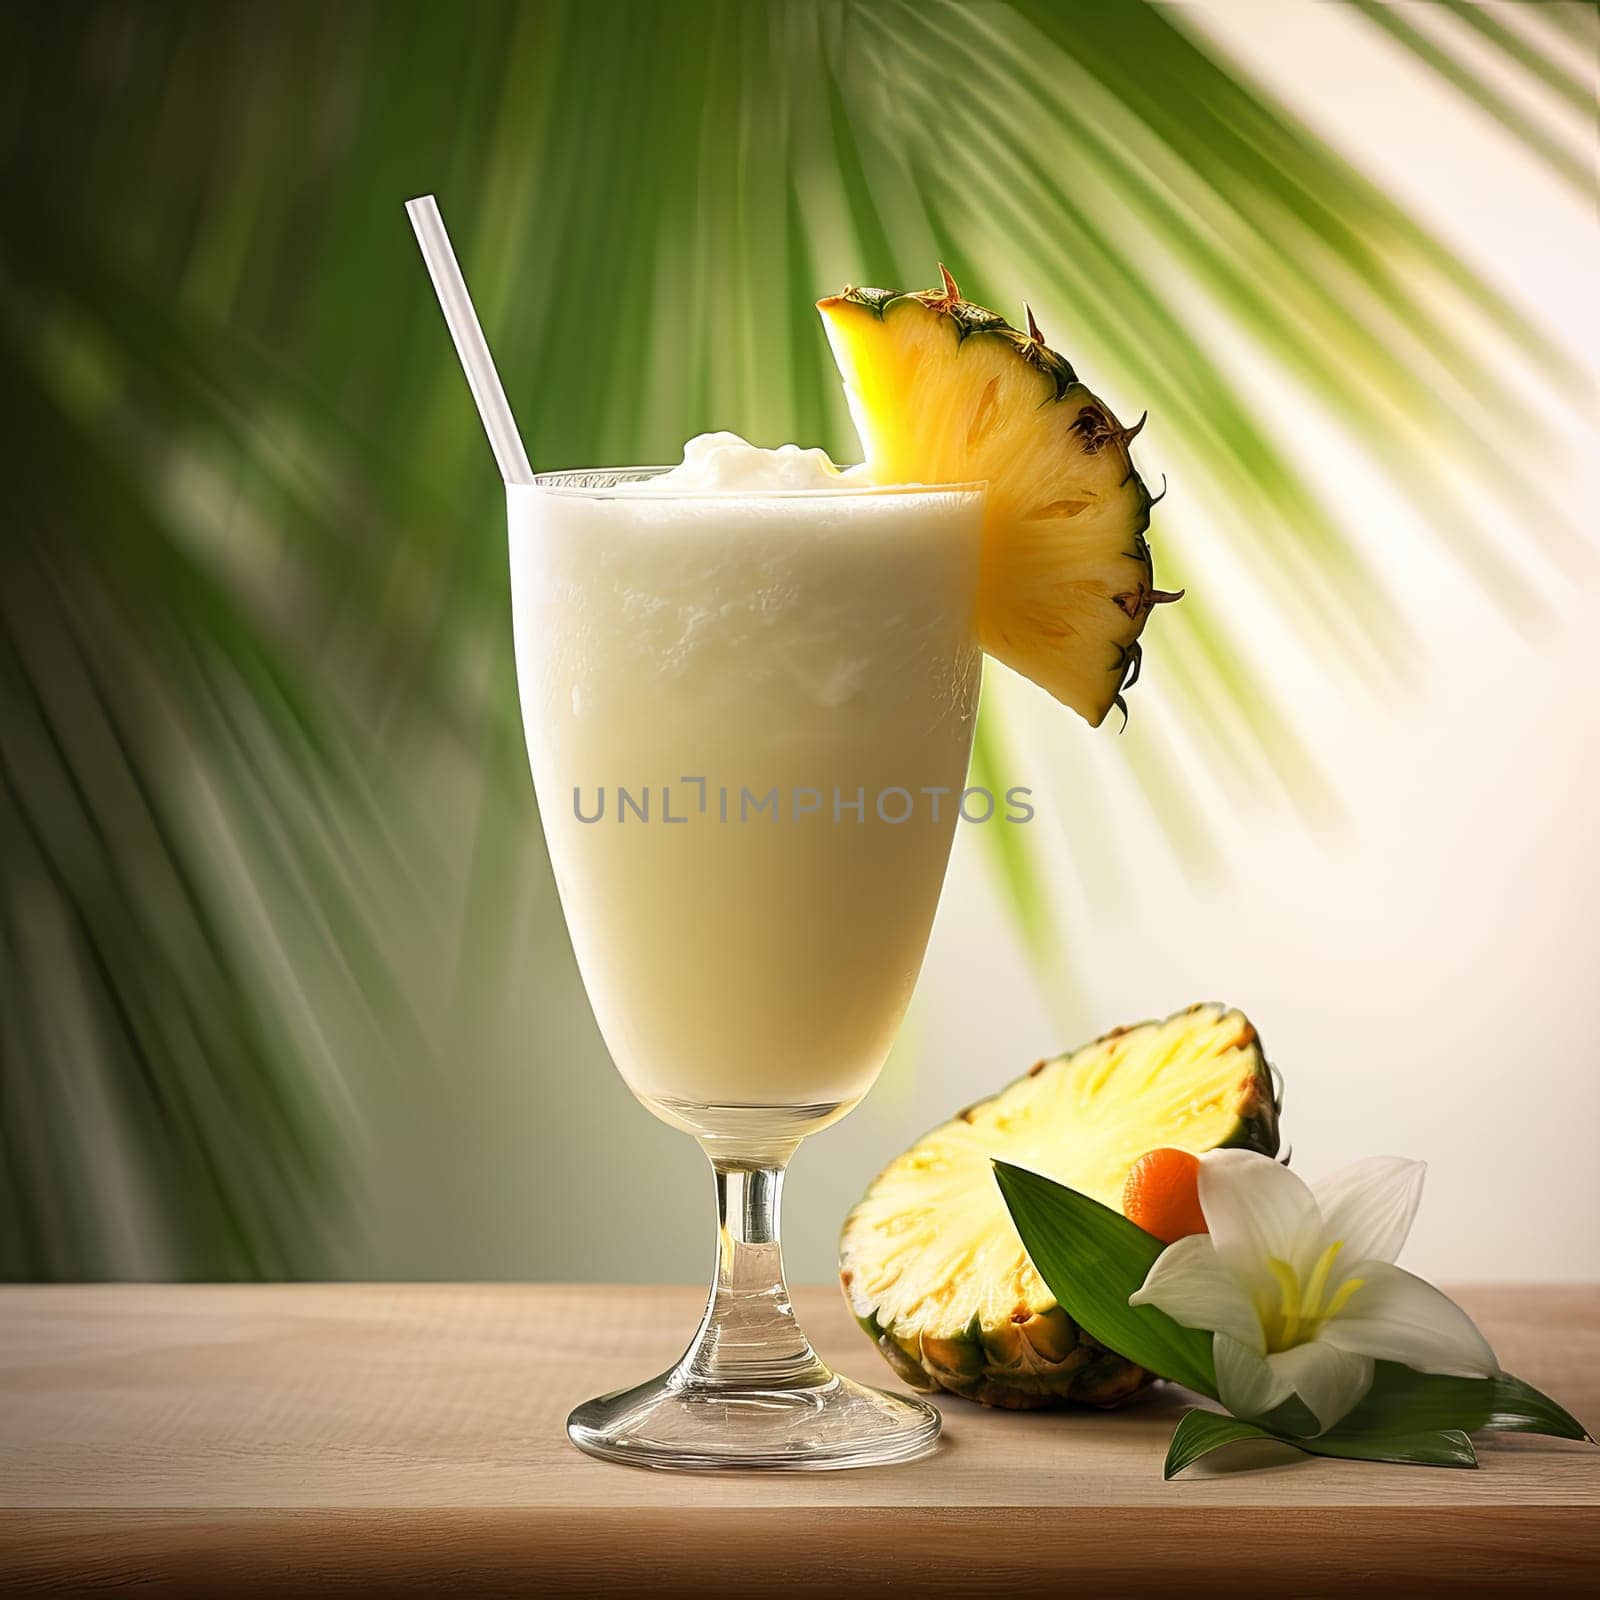 Pina Colada Cocktail Day with Pineapple. Coctail Day on Background with Pineapple Leaves.